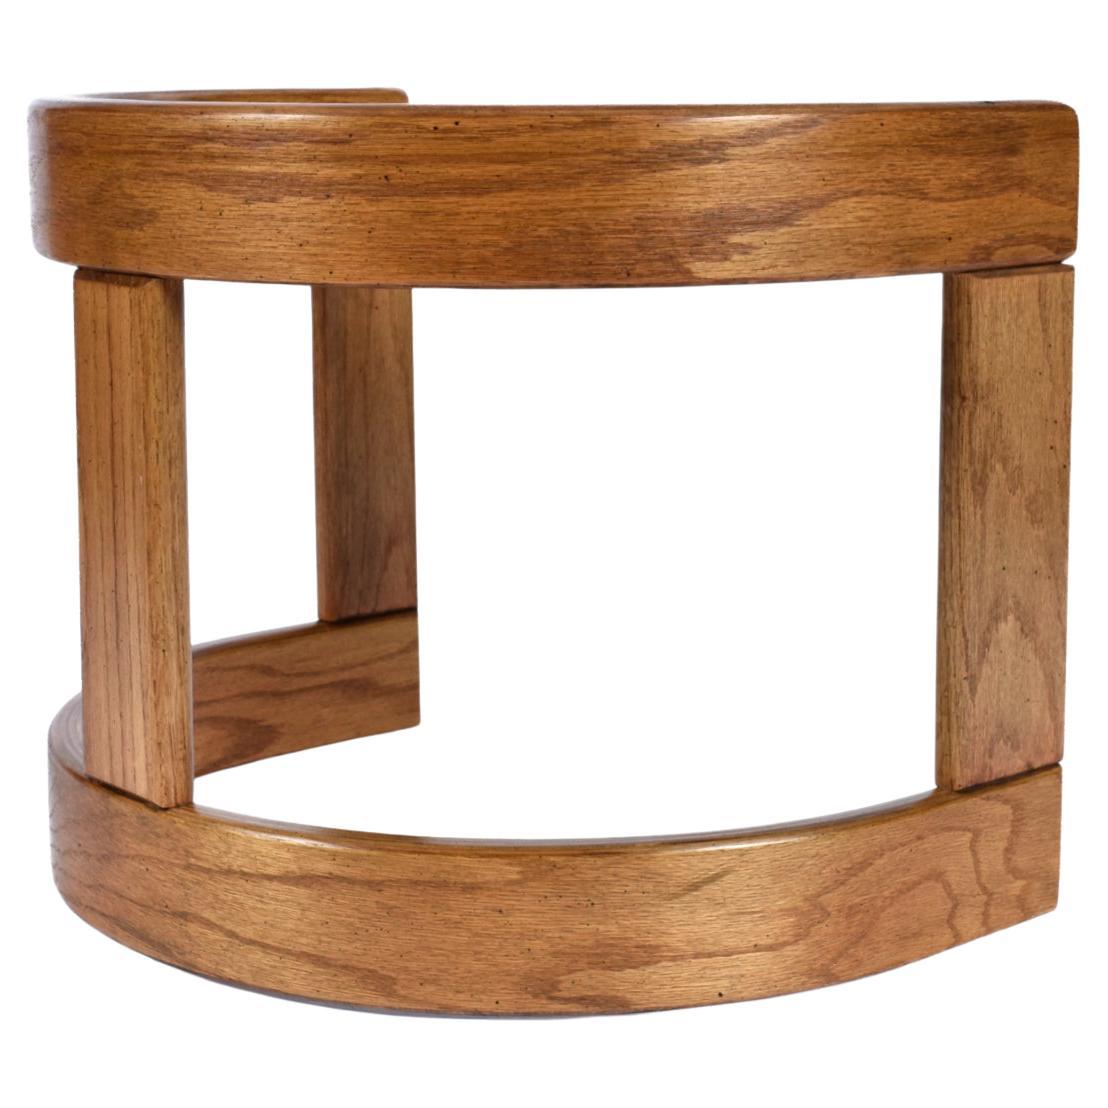 Two end tables available. Sold separately.

This listing is for a single end table. Chair pictured is also sold separately.

Howard Furniture has outdone themselves with these ingeniously designed crescent shaped side tables. The half-moon shape